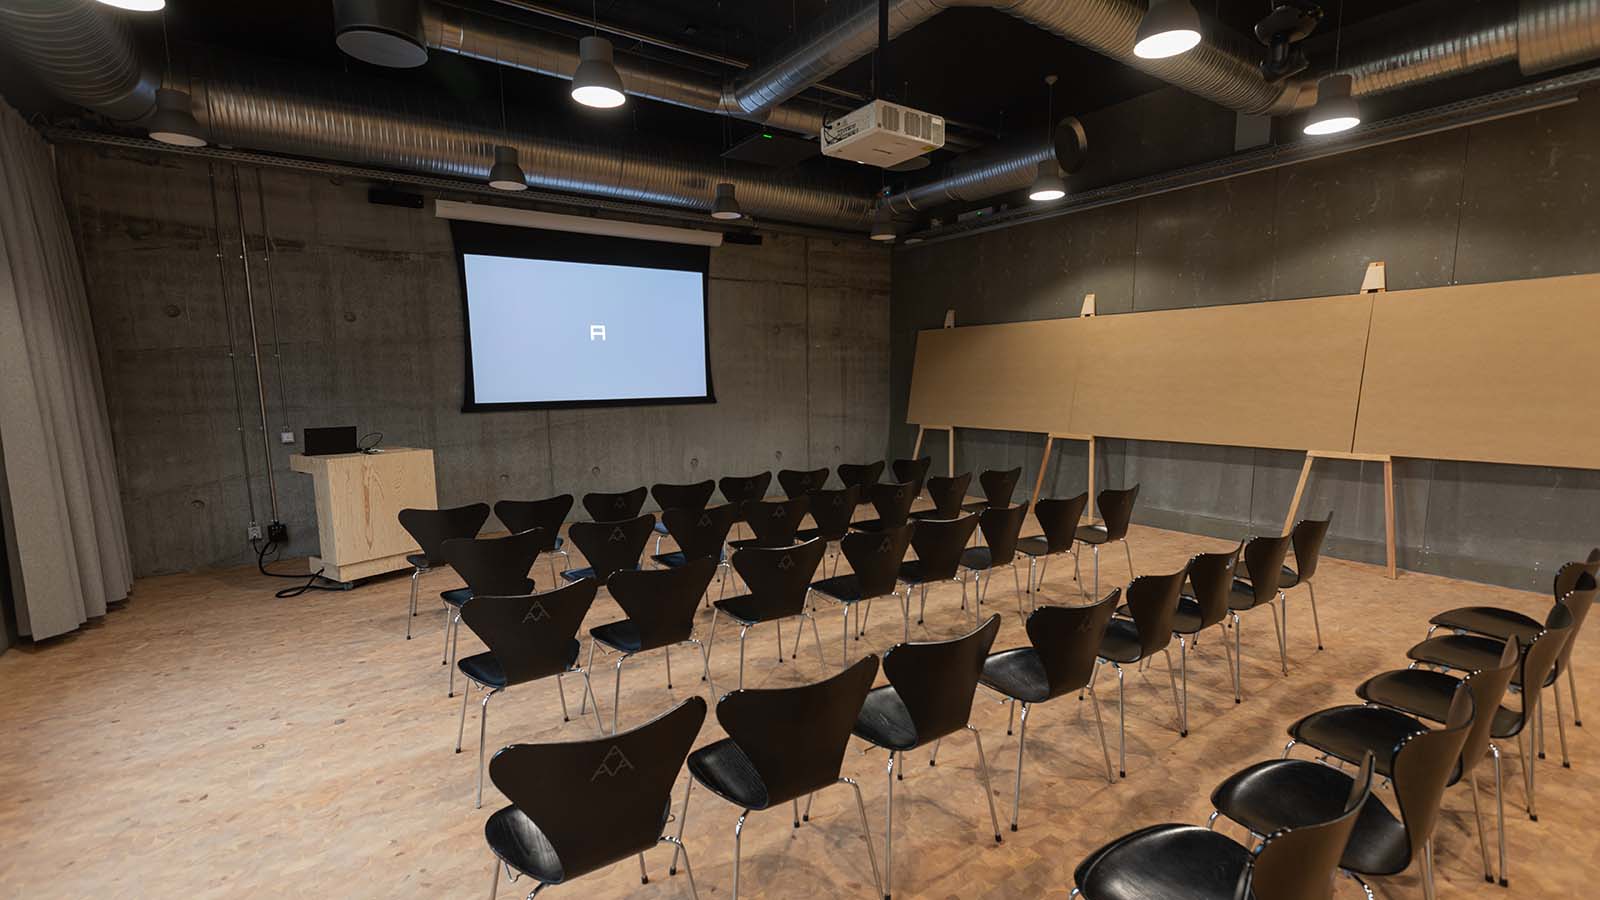 Meyer Sound Constellation Acoustic System Enhances Learning at Danish Architecture School